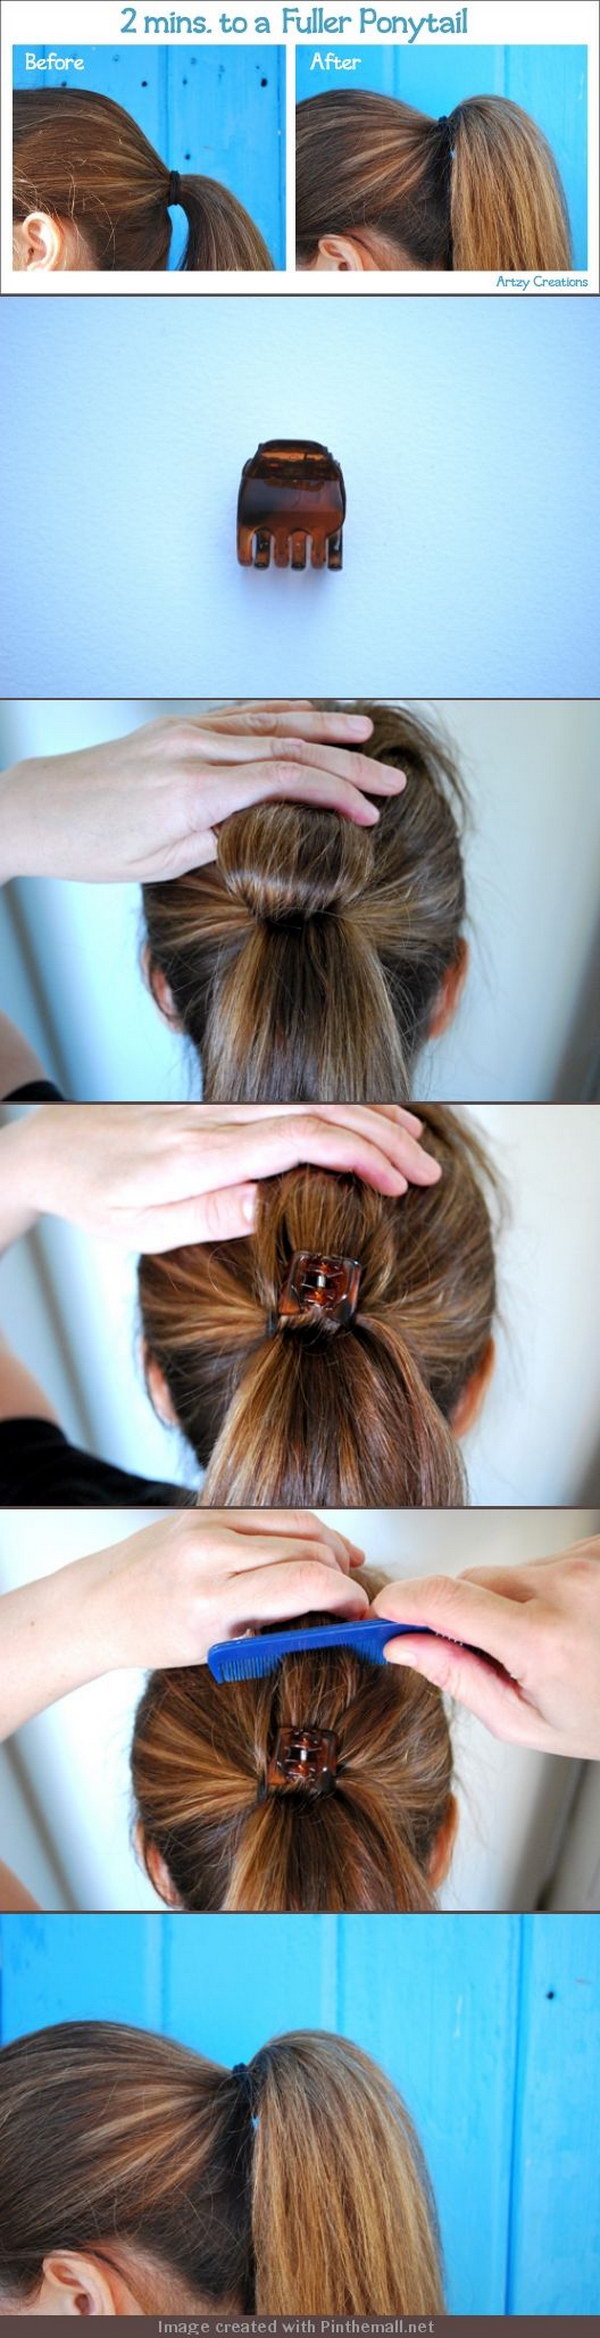 Put a Clip in Hair to Get a Fuller Ponytail 